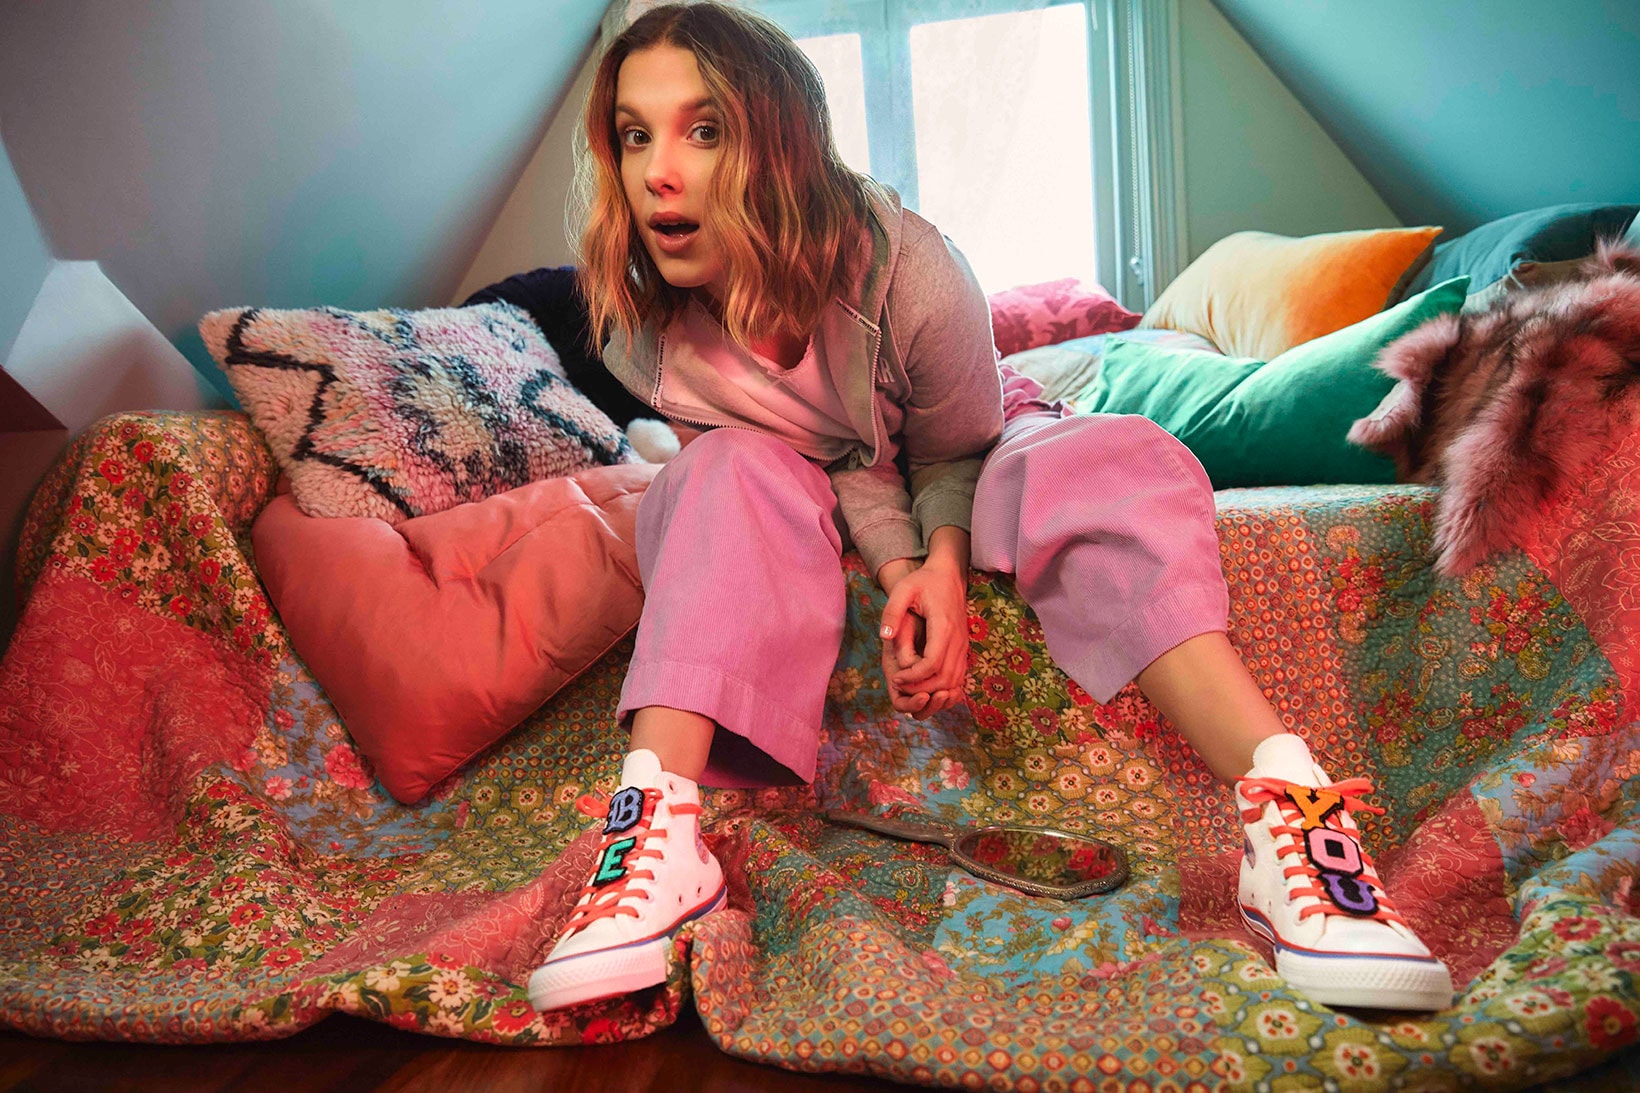 converse millie bobby brown collaboration chuck taylor chuck 70 sneakers black pink white stranger things actress shoes footwear